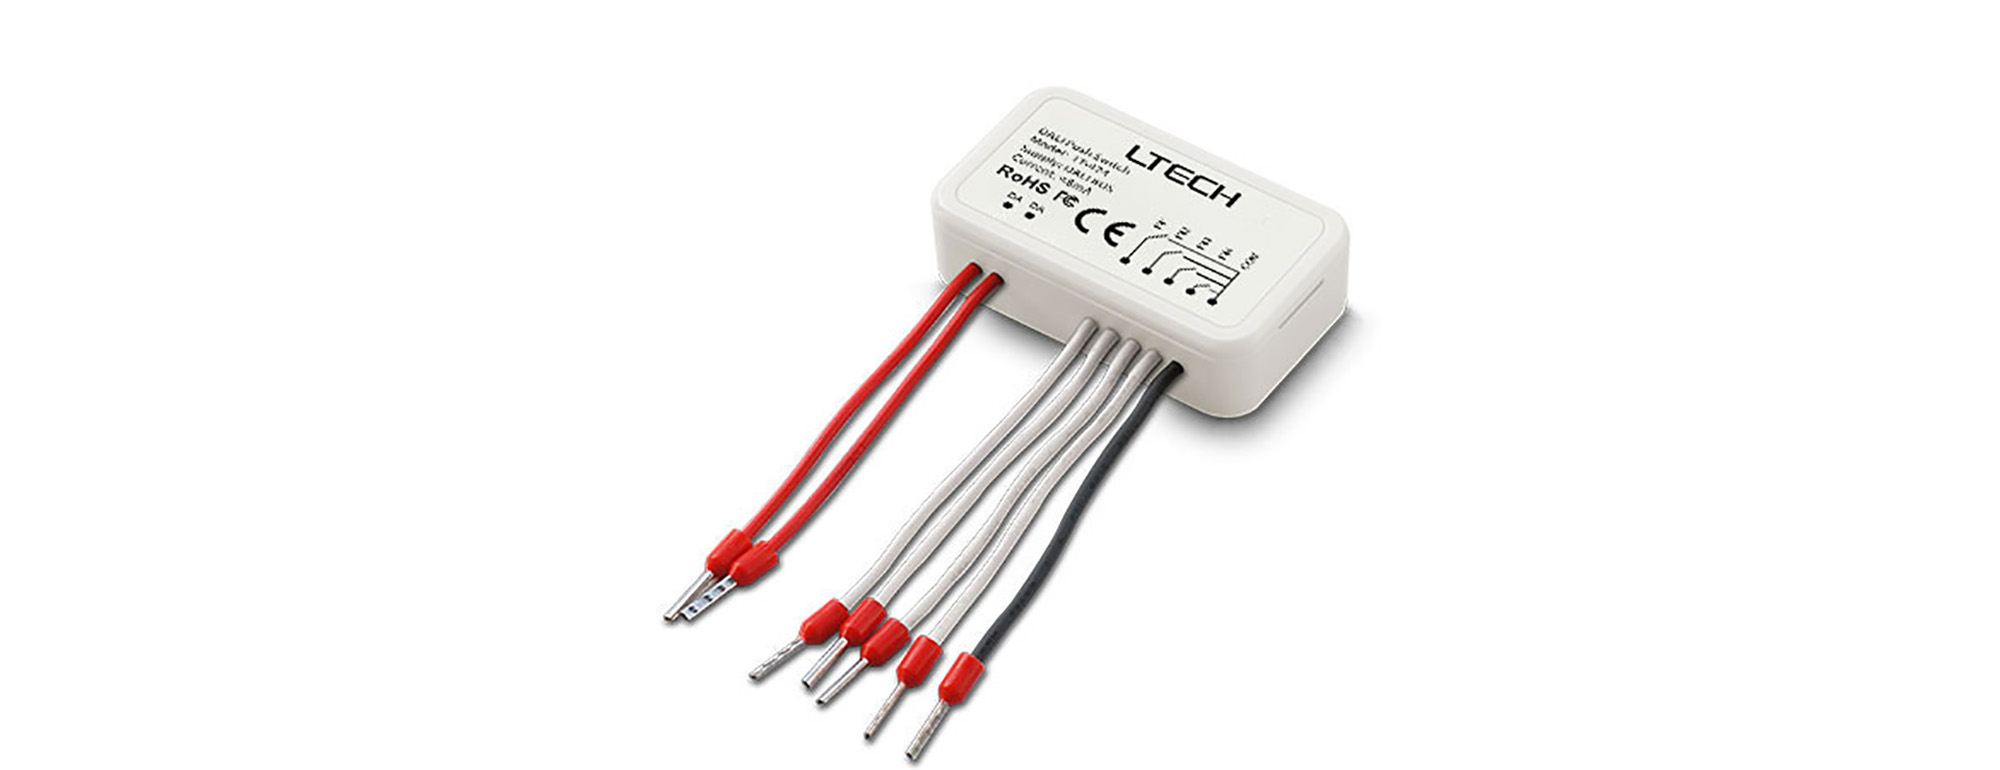 424  Ltech Smart Home 6 in 1 mode DALI push switch. Compact size ;DALI Bus power supply; Safe and Reliable; High working temp. Safe and reliable; IP20.